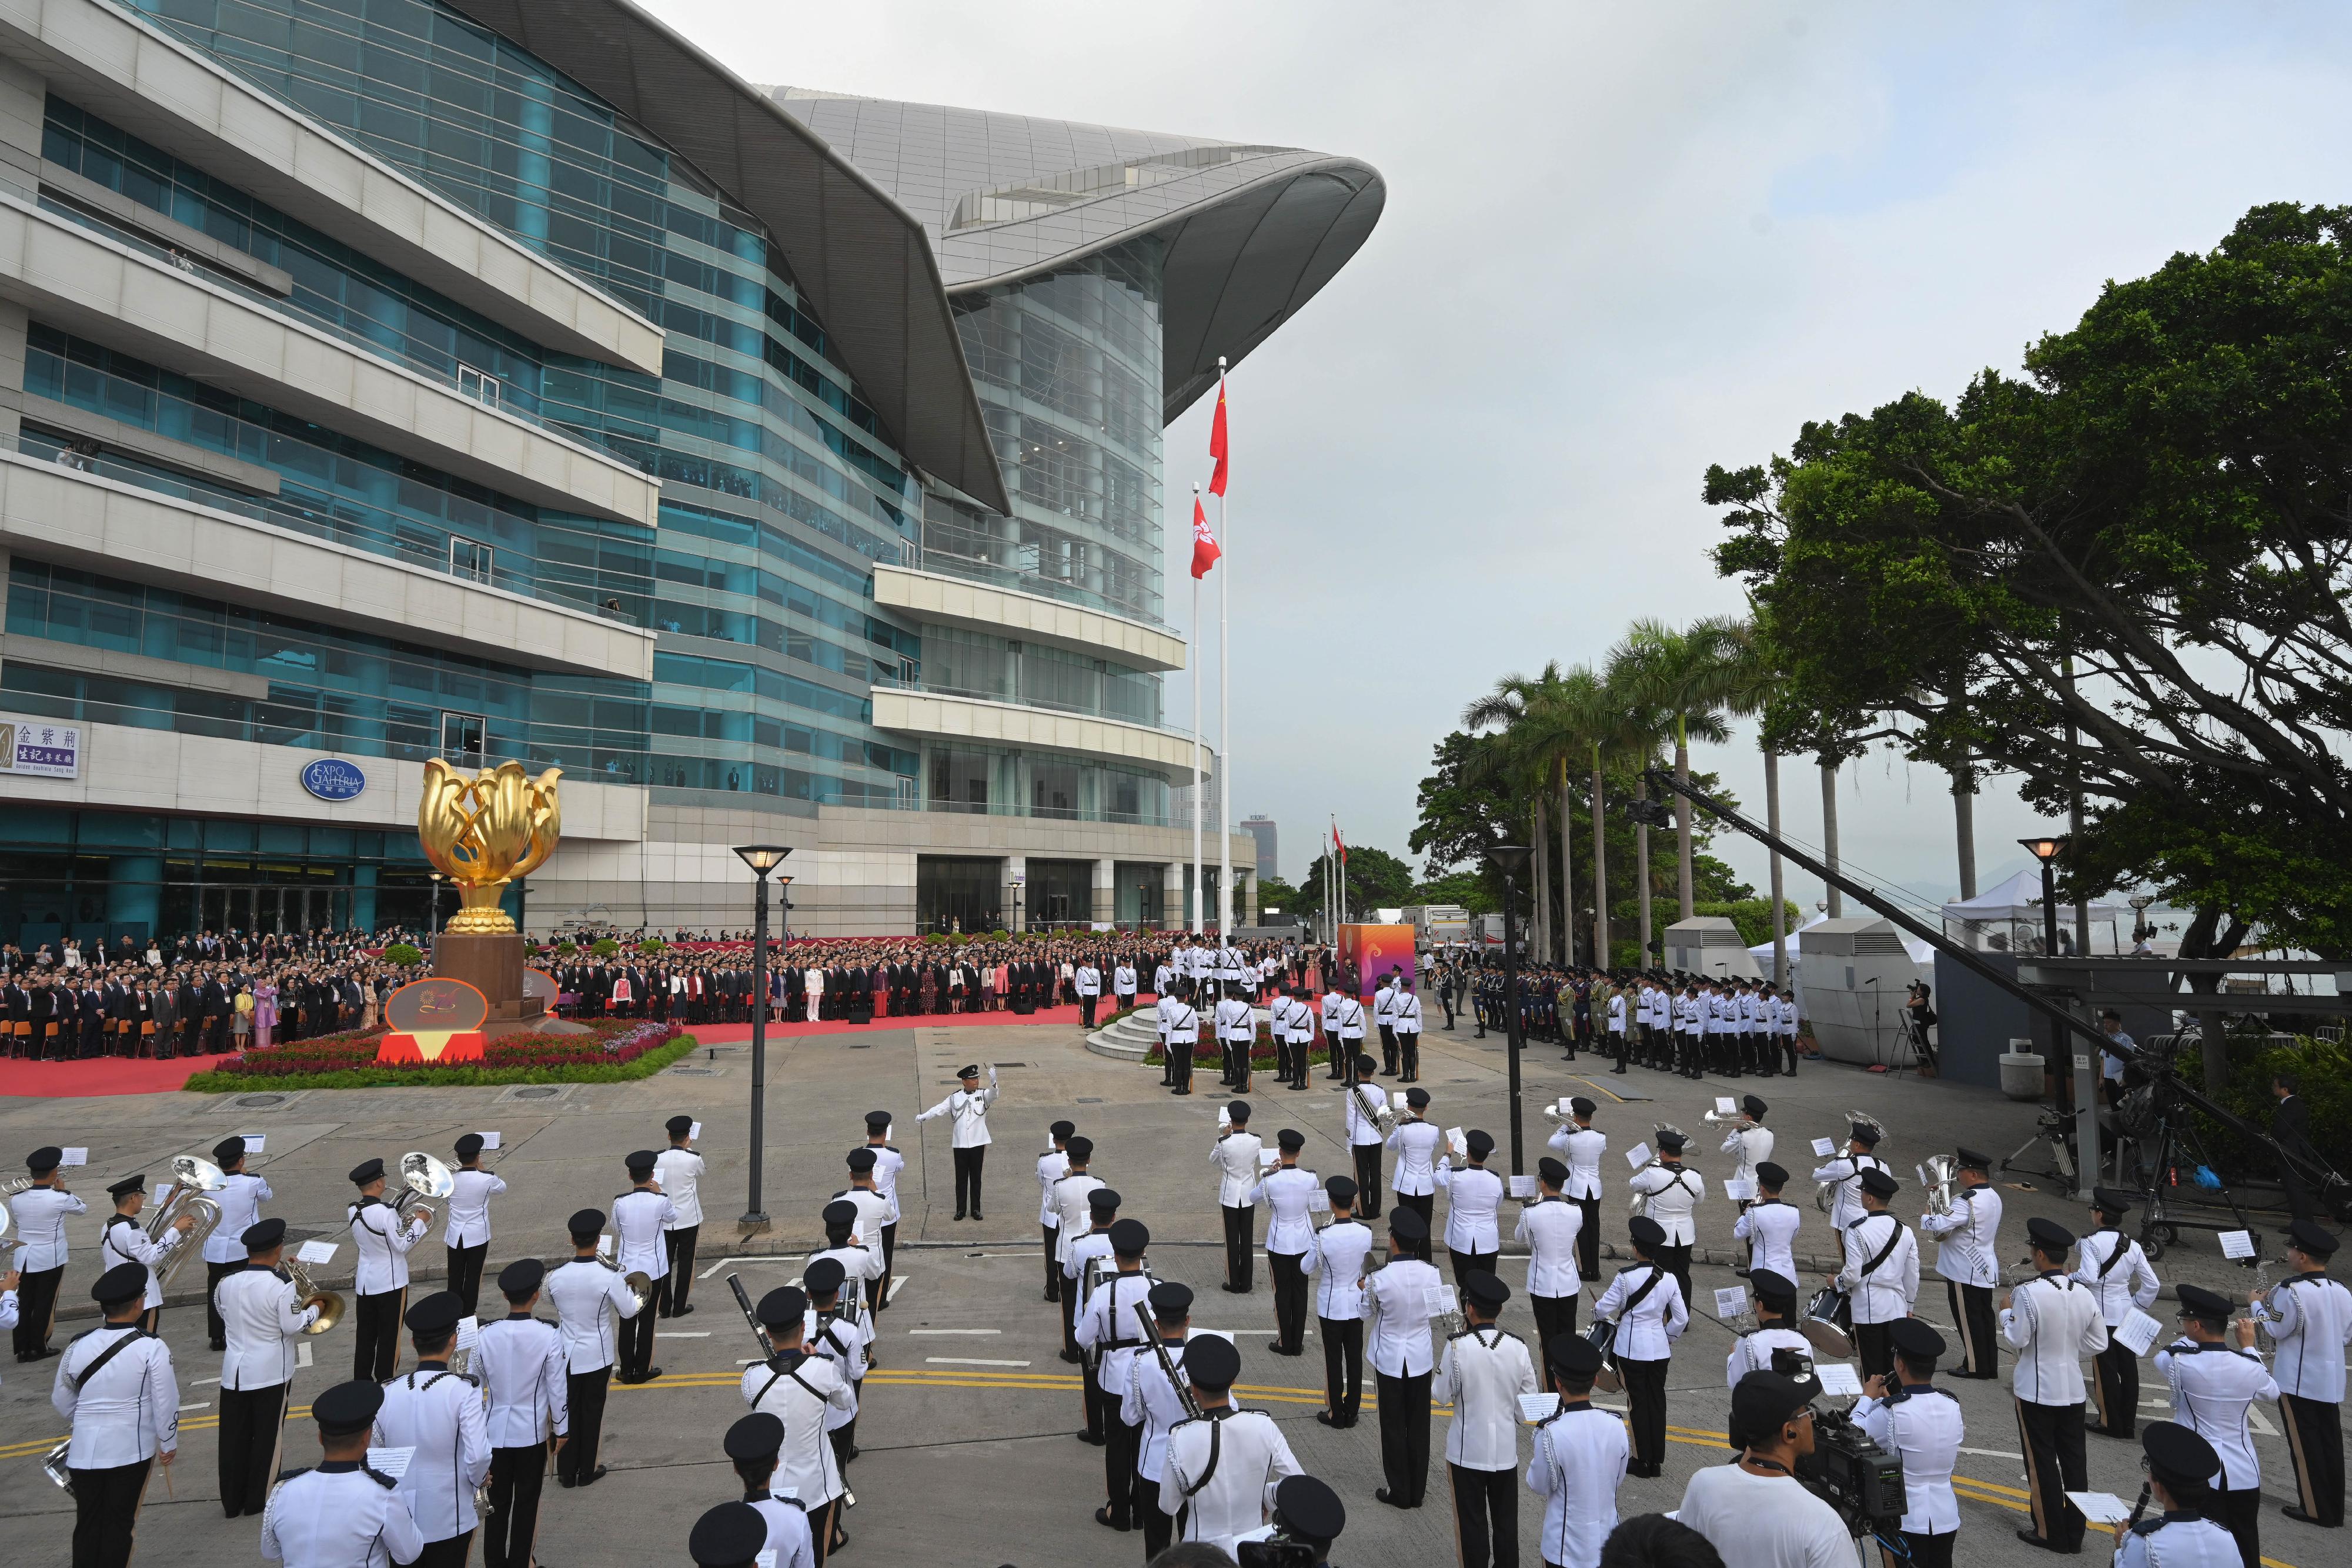 The Chief Executive, Mr John Lee, together with Principal Officials and guests, attends the flag-raising ceremony for the 74th anniversary of the founding of the People's Republic of China at Golden Bauhinia Square in Wan Chai this morning (October 1).